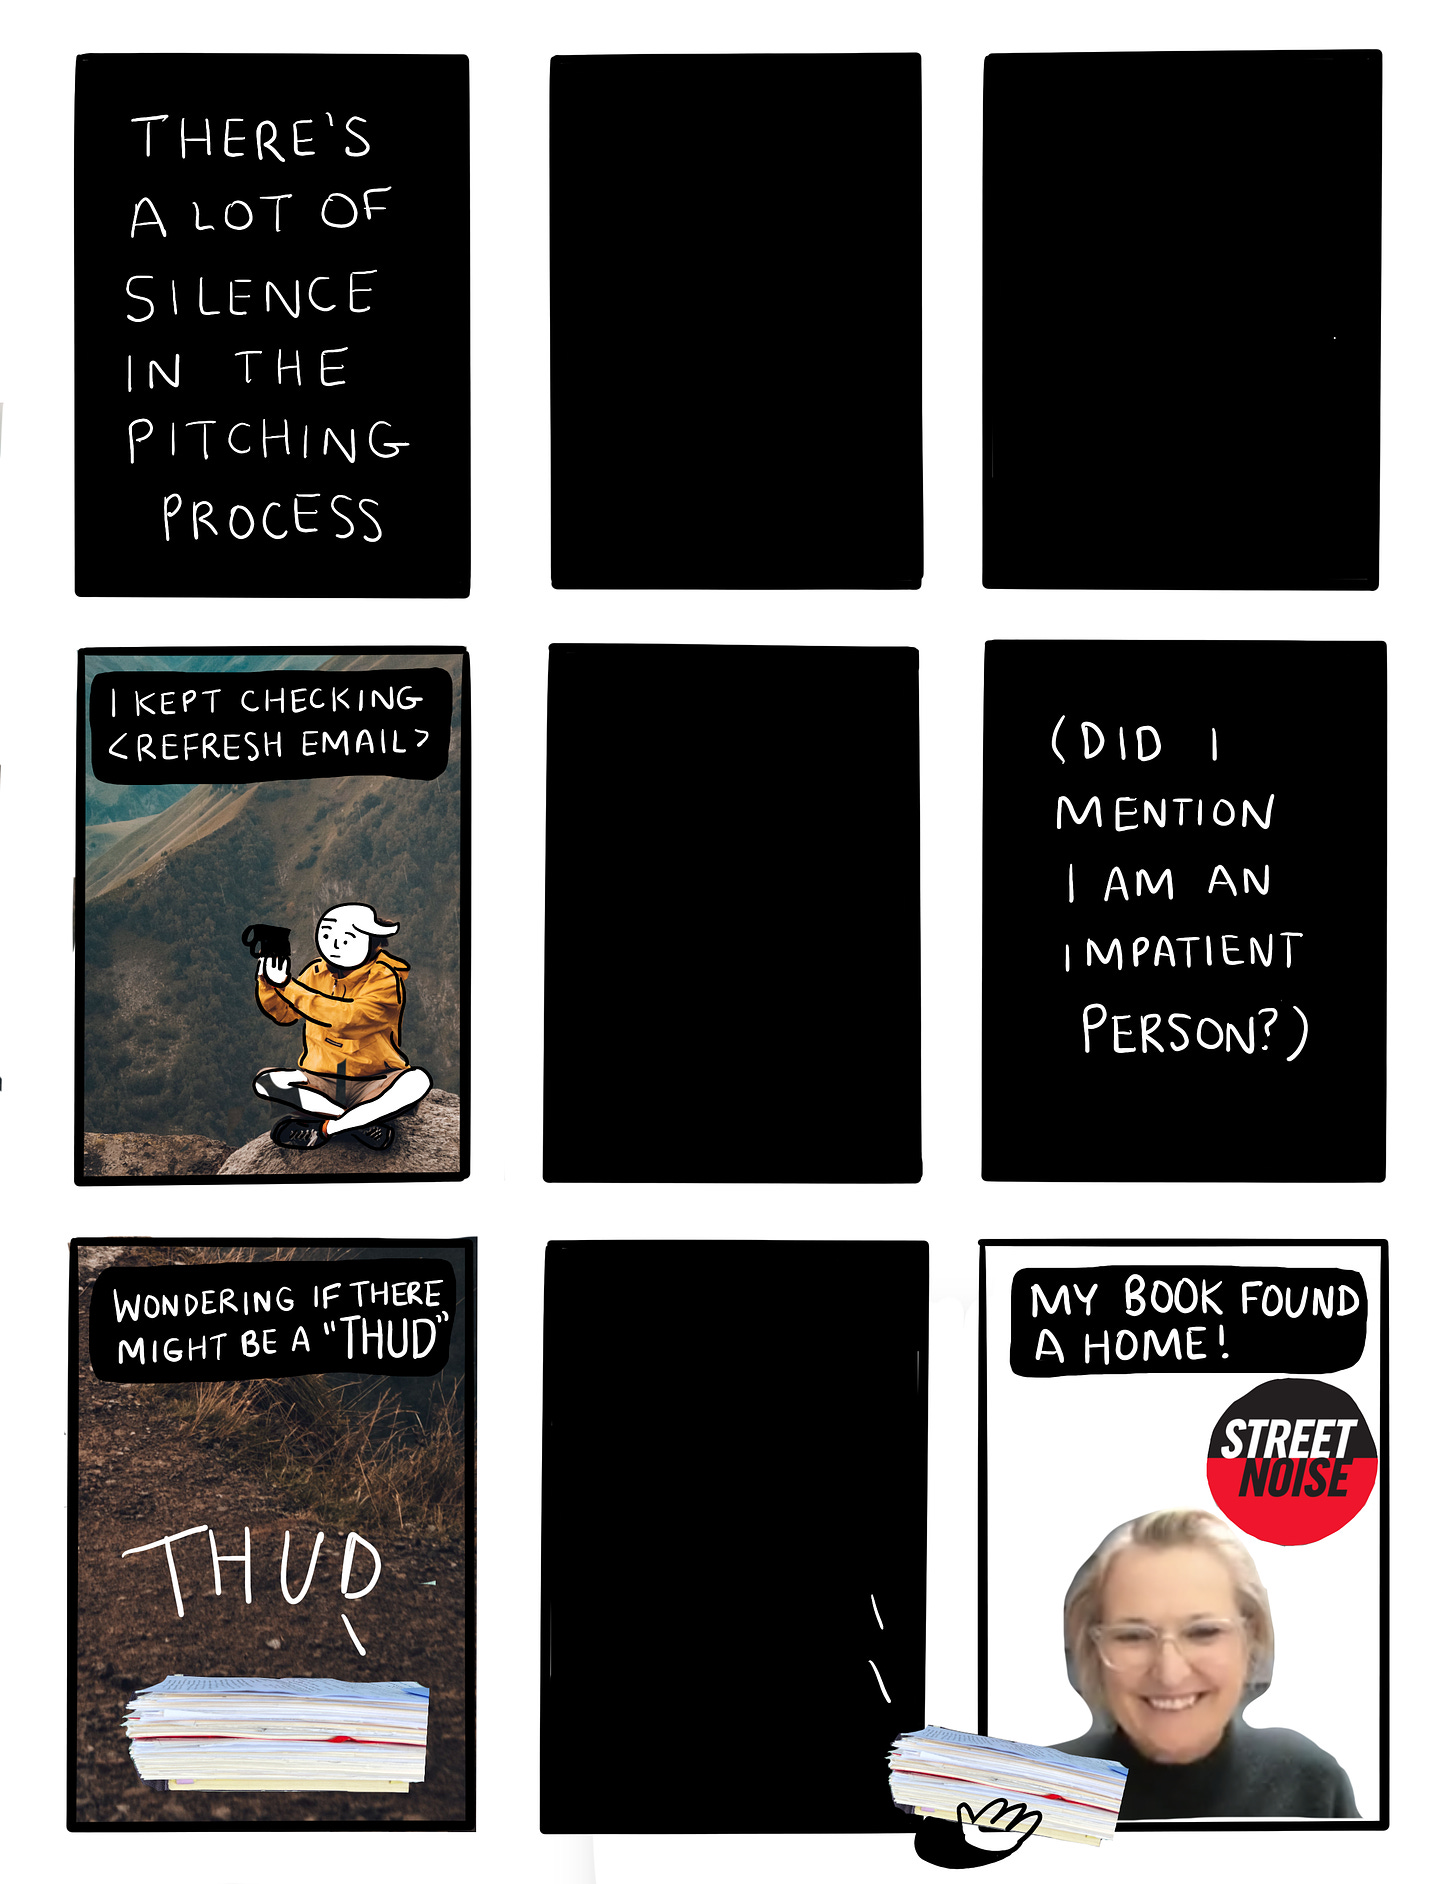 Panel 11: There’s a lot of silence in the pitching process; text on black background. Panel 12 and panel 13 are black boxes.  Panel 14: a view of me, my head superimposed on a photograph of a human sitting on a mountain top holding binoculars. Text says “I kept checking. <Refresh email>” Panel 15: black box. Panel 16: (Did I mention I am an impatient person?); text on black background Panel 17: Wondering if there might be a “thud” Image shows dirt and a pile of papers and the text “THUD” next to it Panel 18: black box Panel 19: My book found a home. An image of Liz Frances, publisher at Street Noise Books, holding a stack of papers that is my manuscript. The Street noise logo in black and red is  Shown behind her.